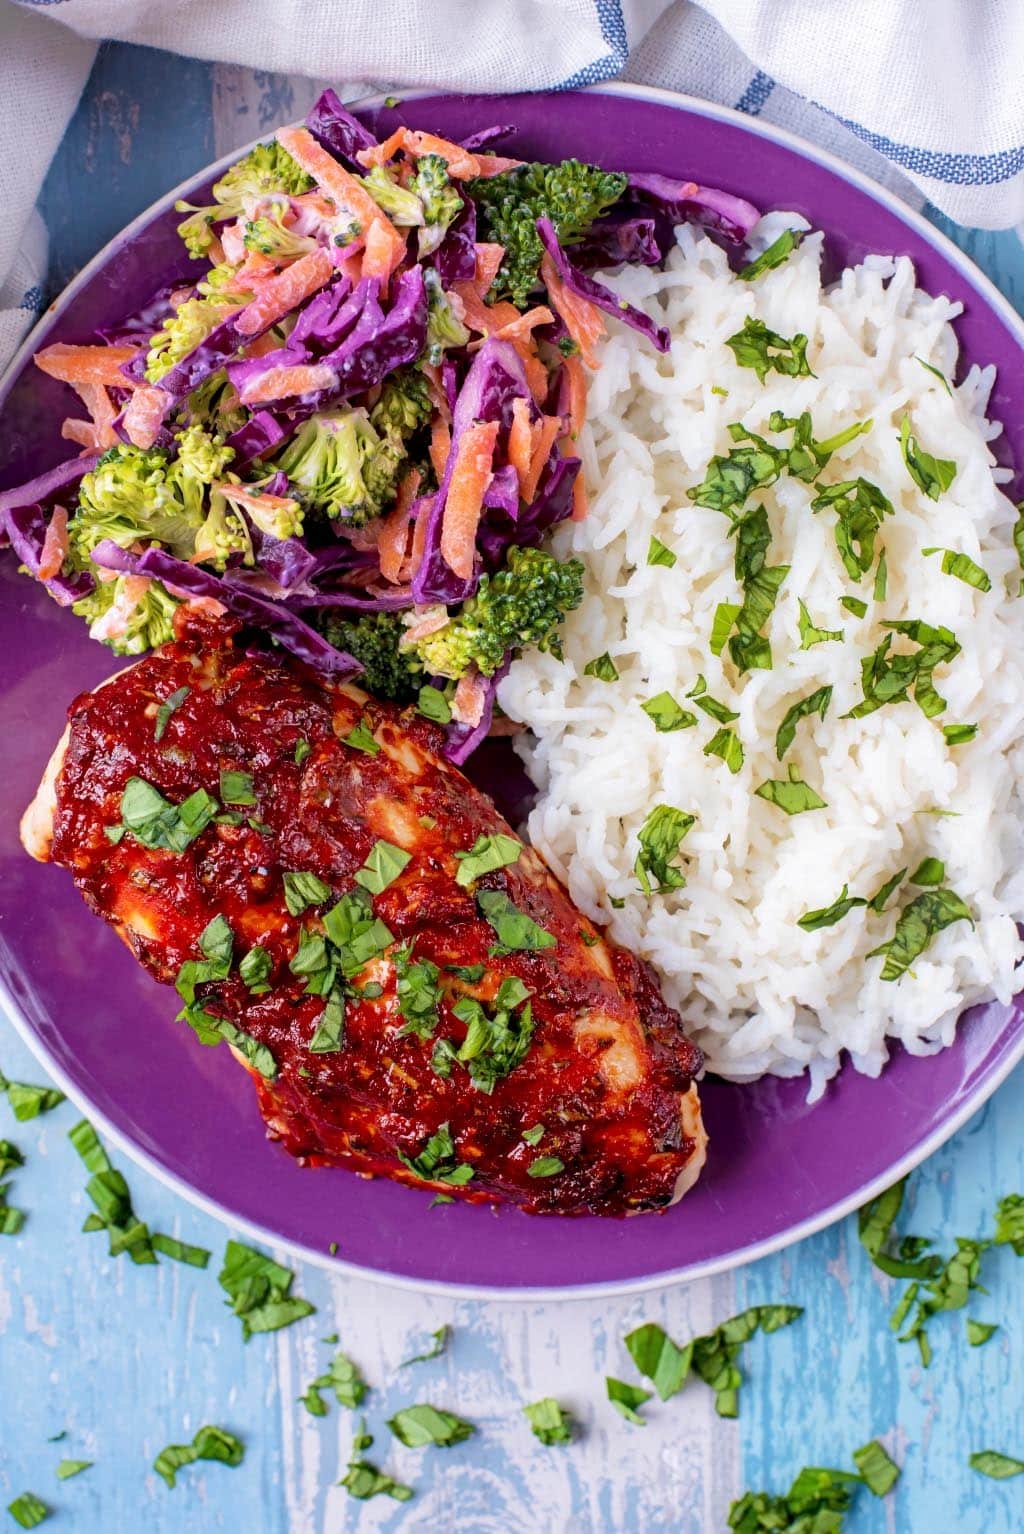 A plate of chicken, rice and slaw.